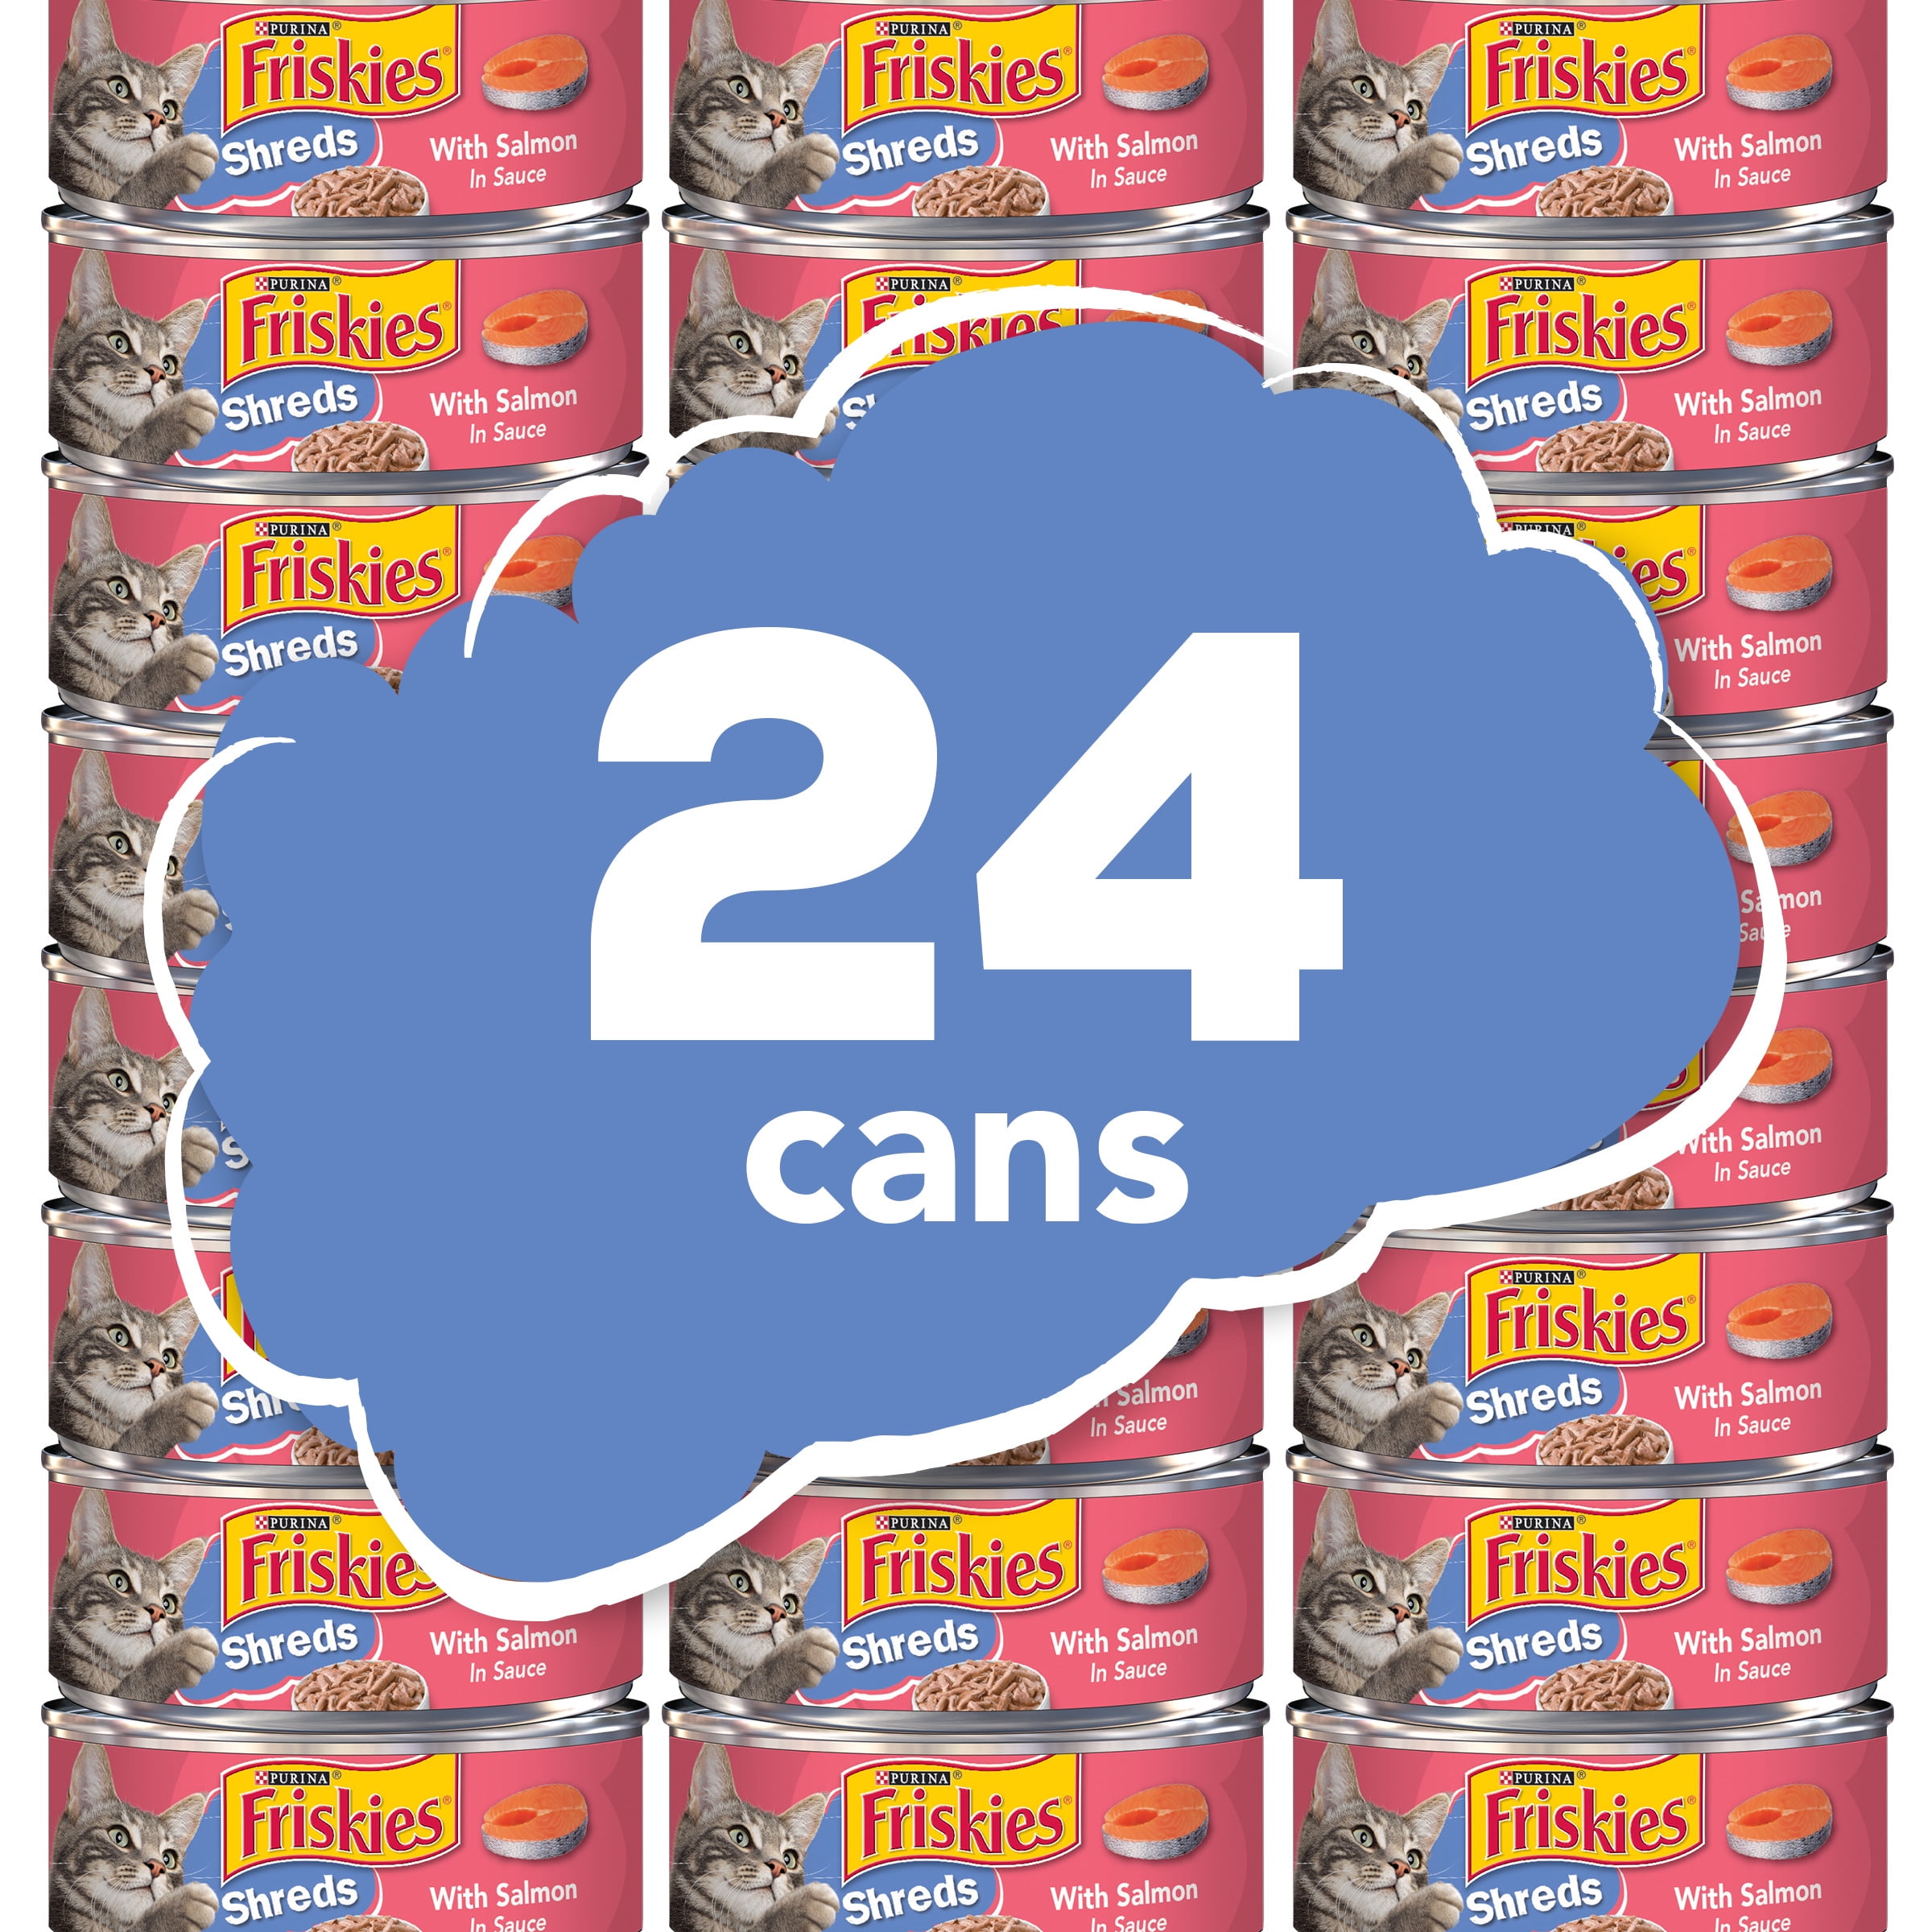 Purina Friskies Shreds Wet Cat Food Salmon in Sauce, 5.5 oz Cans (24 Pack) - 1